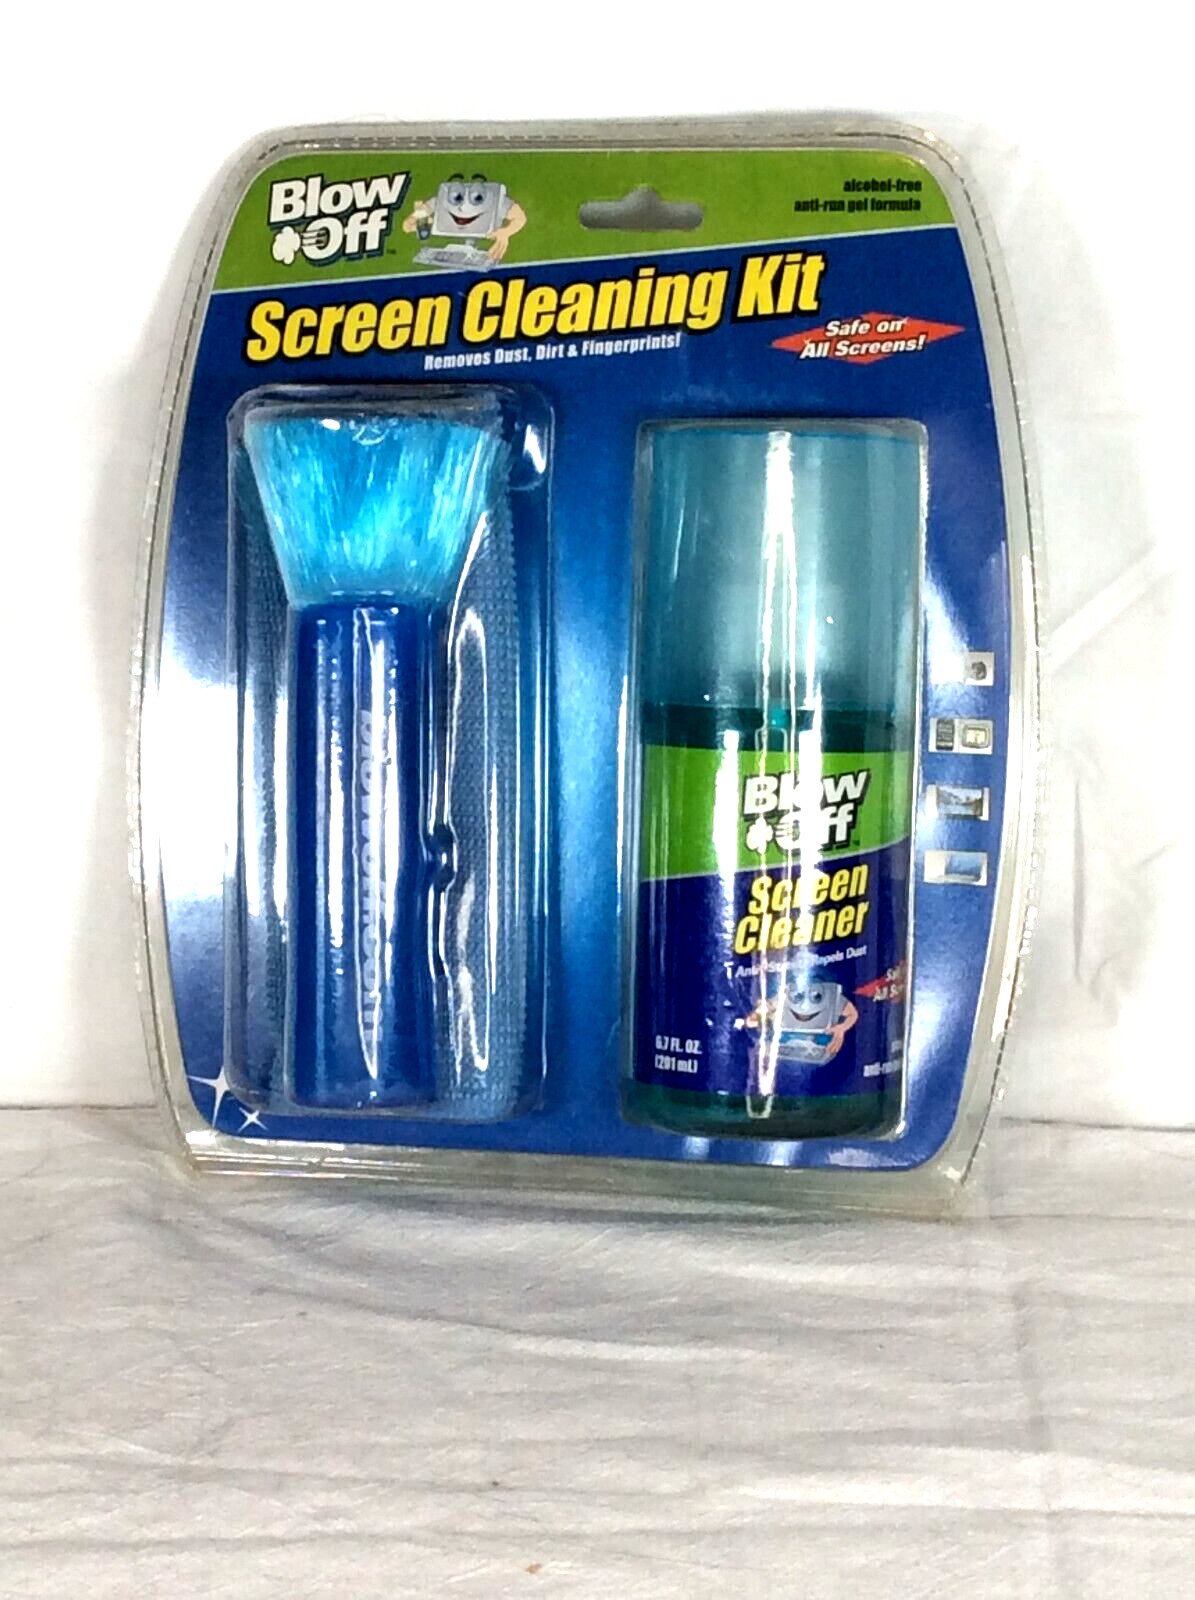 BLOW OFF SCREEN CLEANING KIT. SAFE ON ALL SCREENS. NEW IN BOX